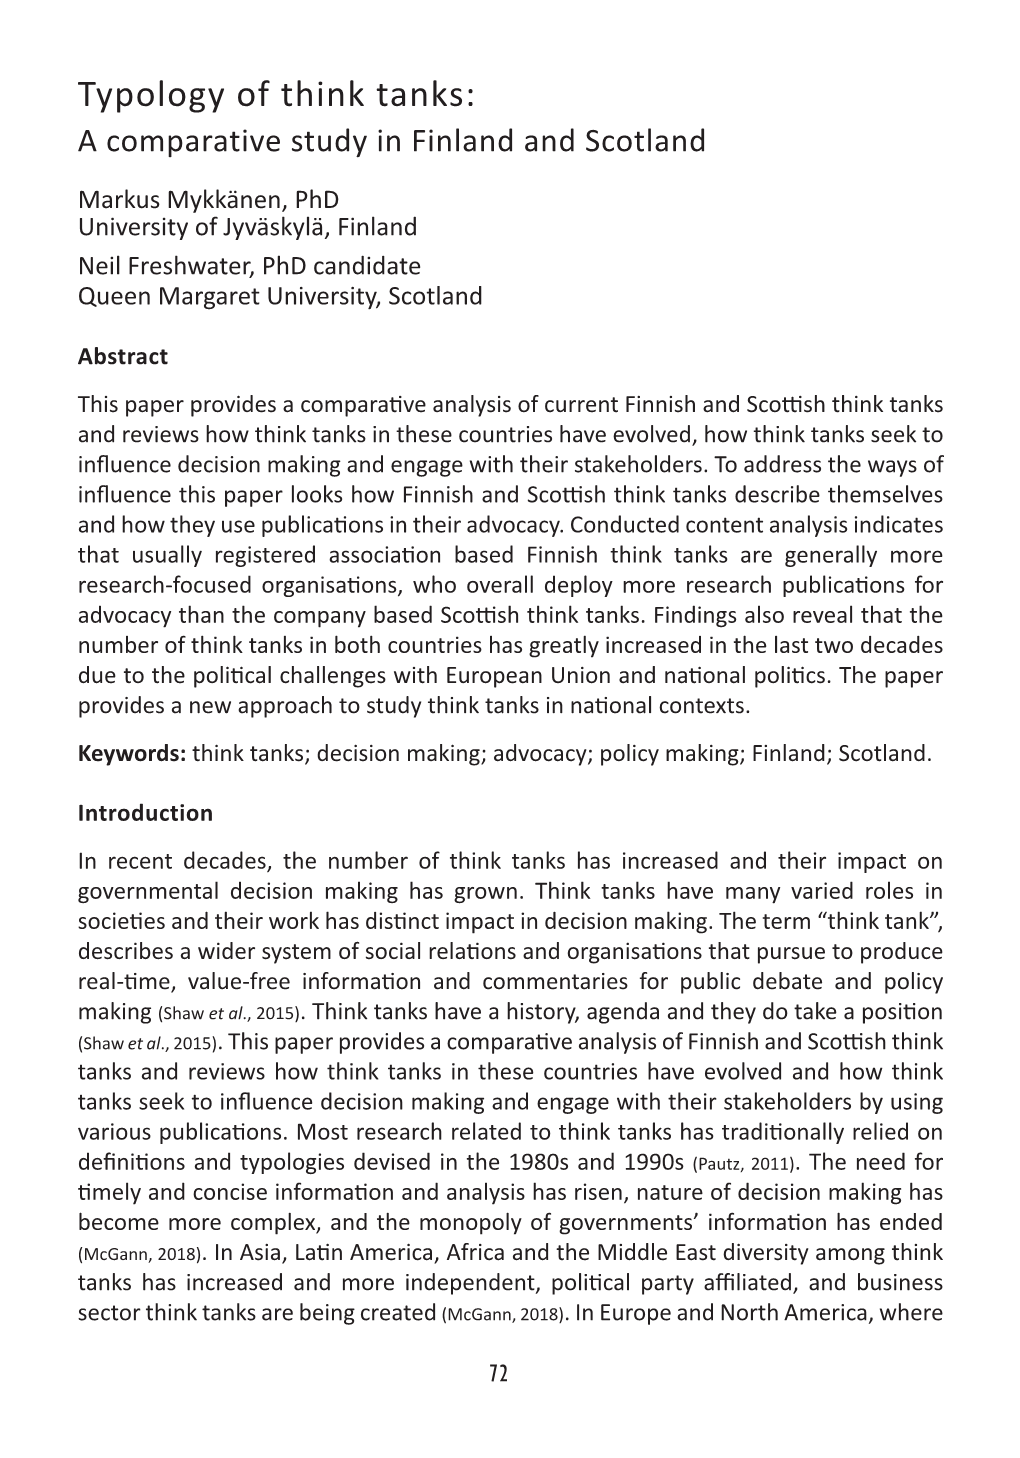 Typology of Think Tanks: a Comparative Study in Finland and Scotland